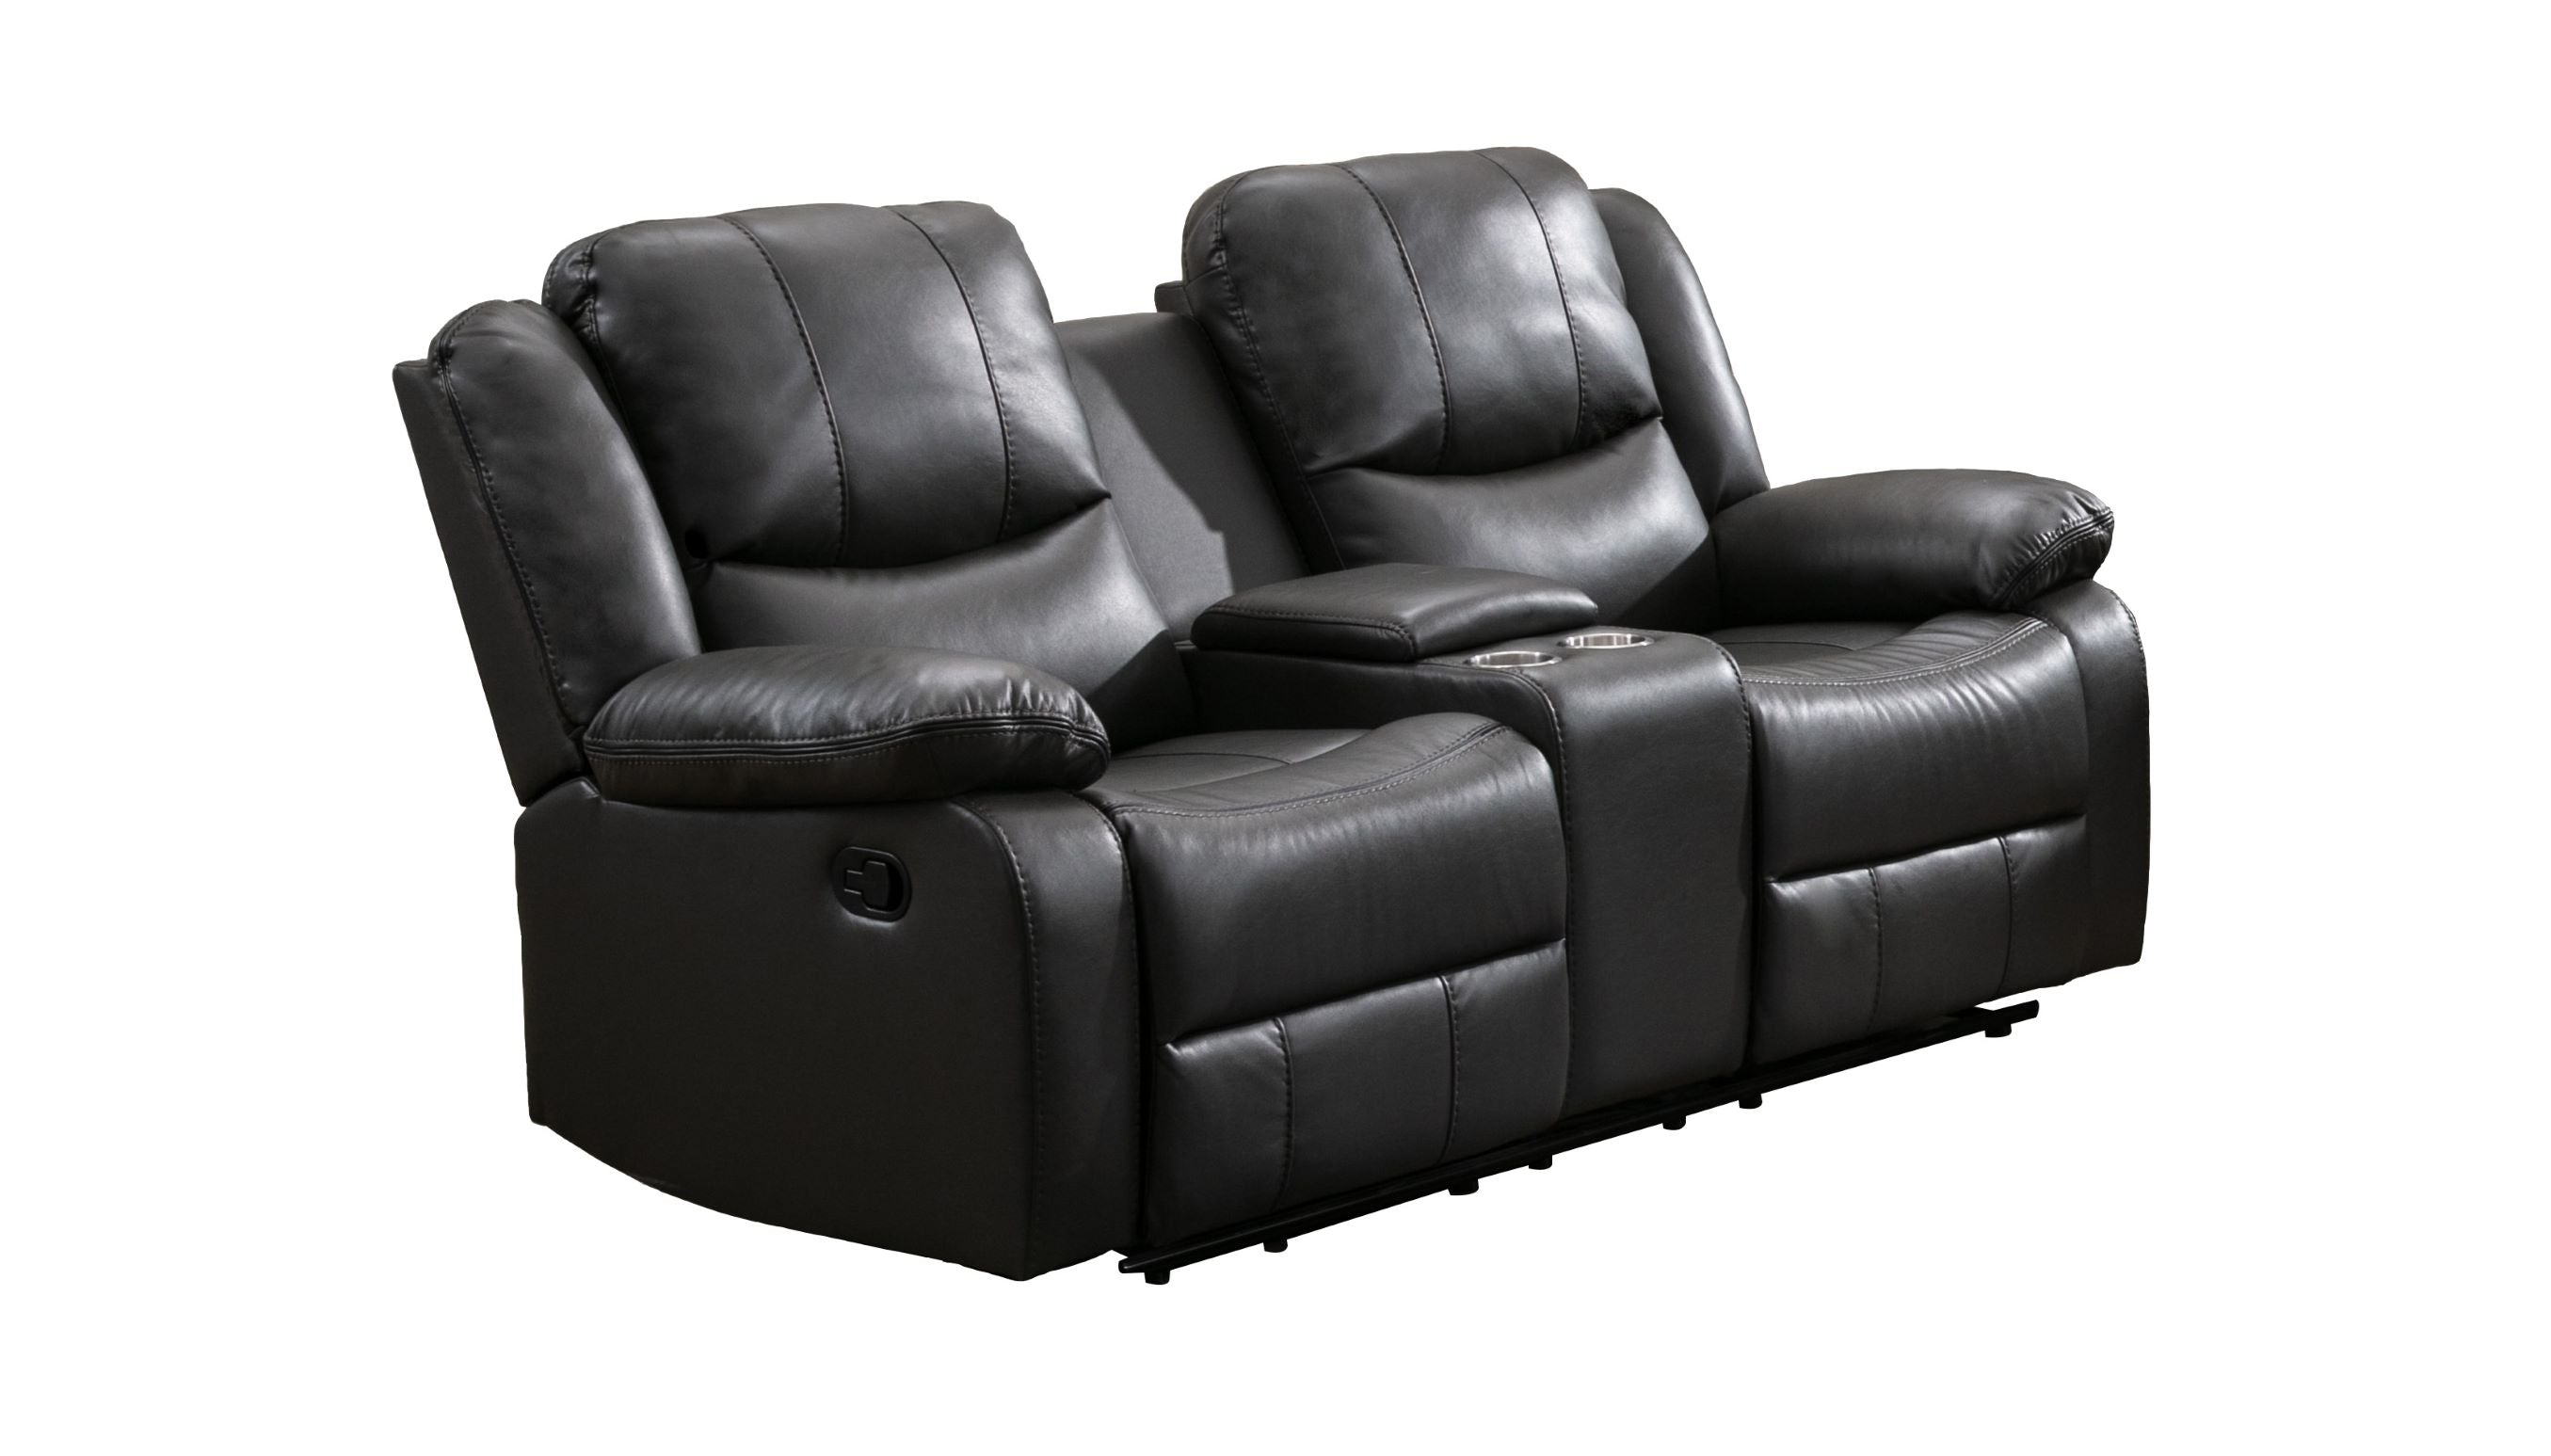 McLeod reclining sofa collection 99846GRY